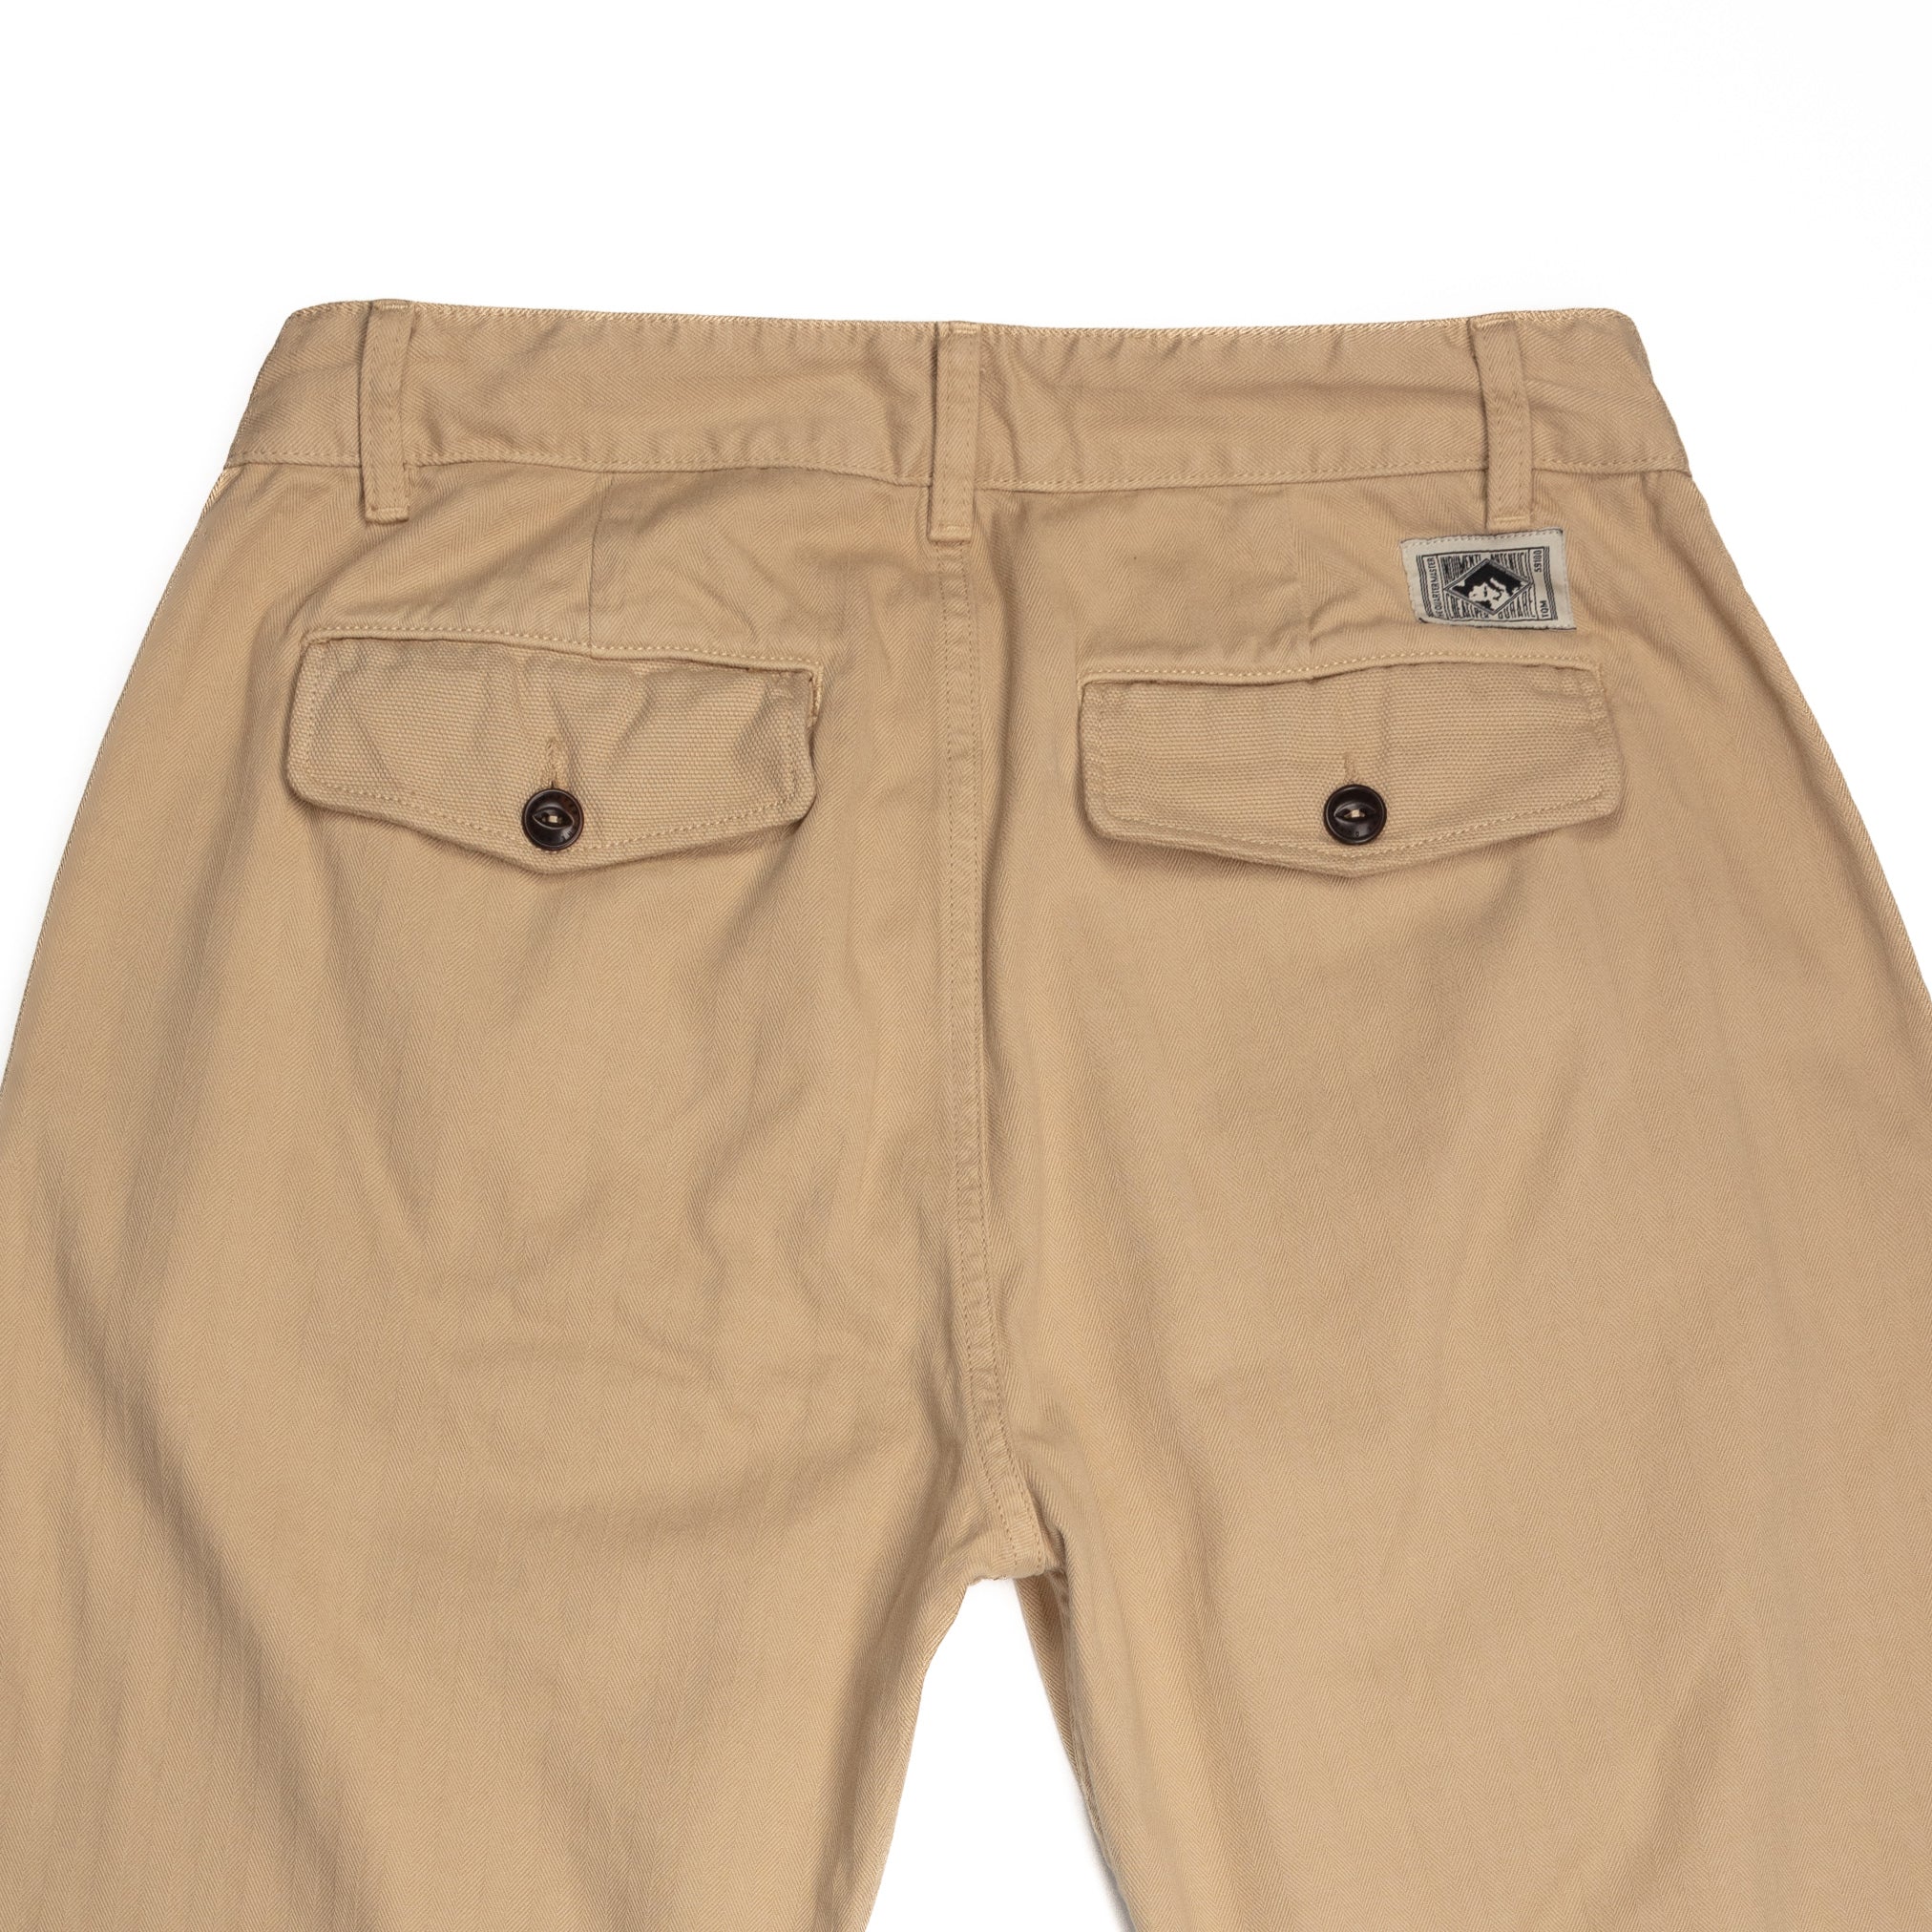 French Chinos in Khaki HBT